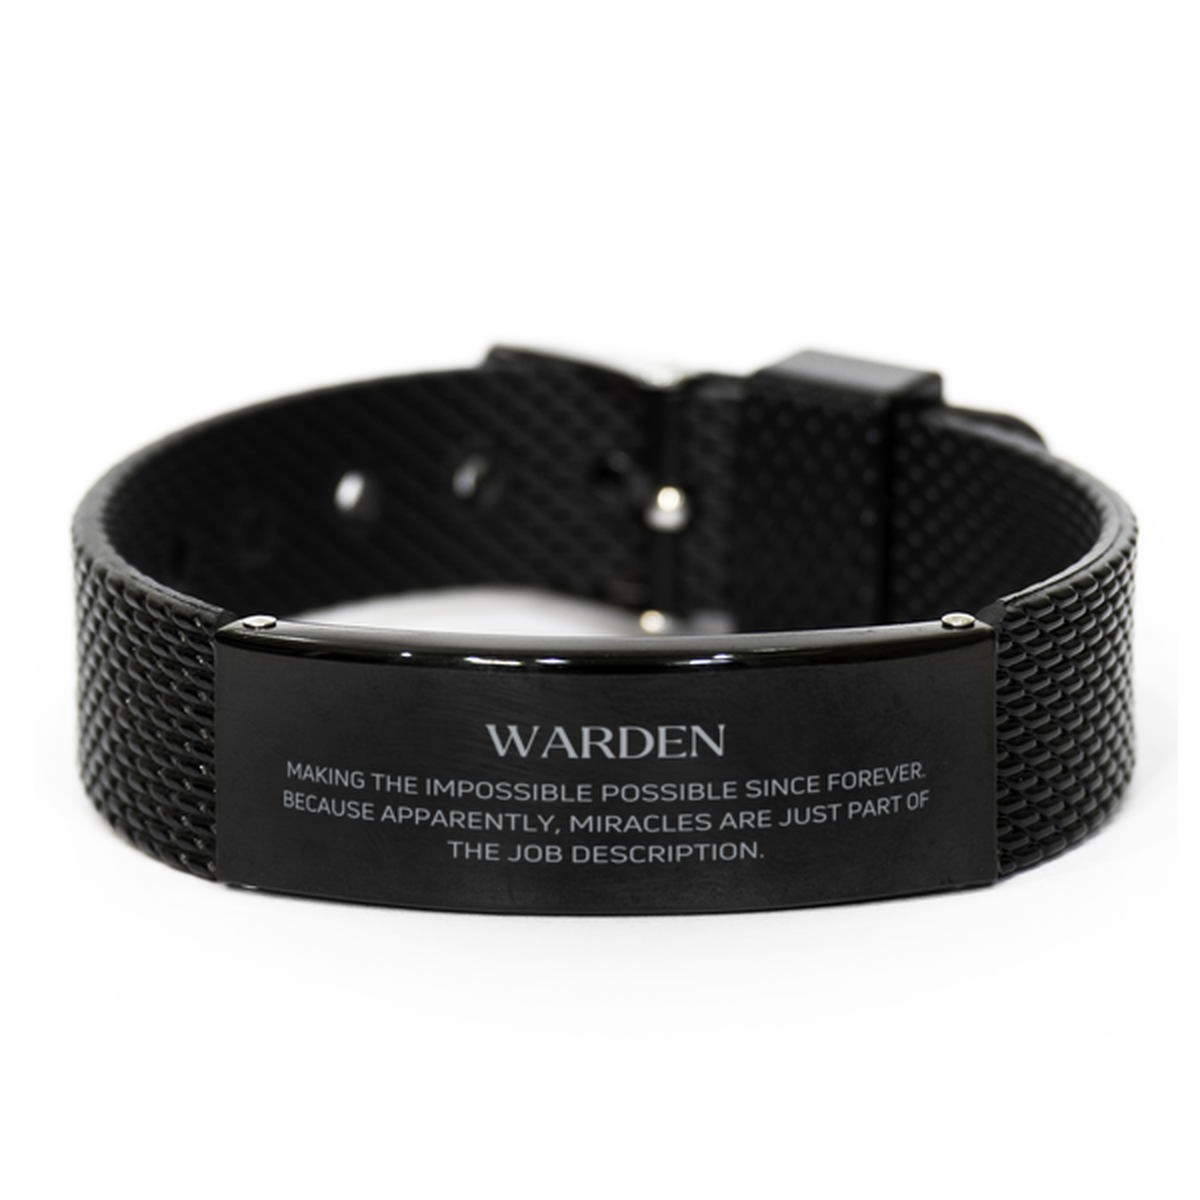 Funny Warden Gifts, Miracles are just part of the job description, Inspirational Birthday Black Shark Mesh Bracelet For Warden, Men, Women, Coworkers, Friends, Boss